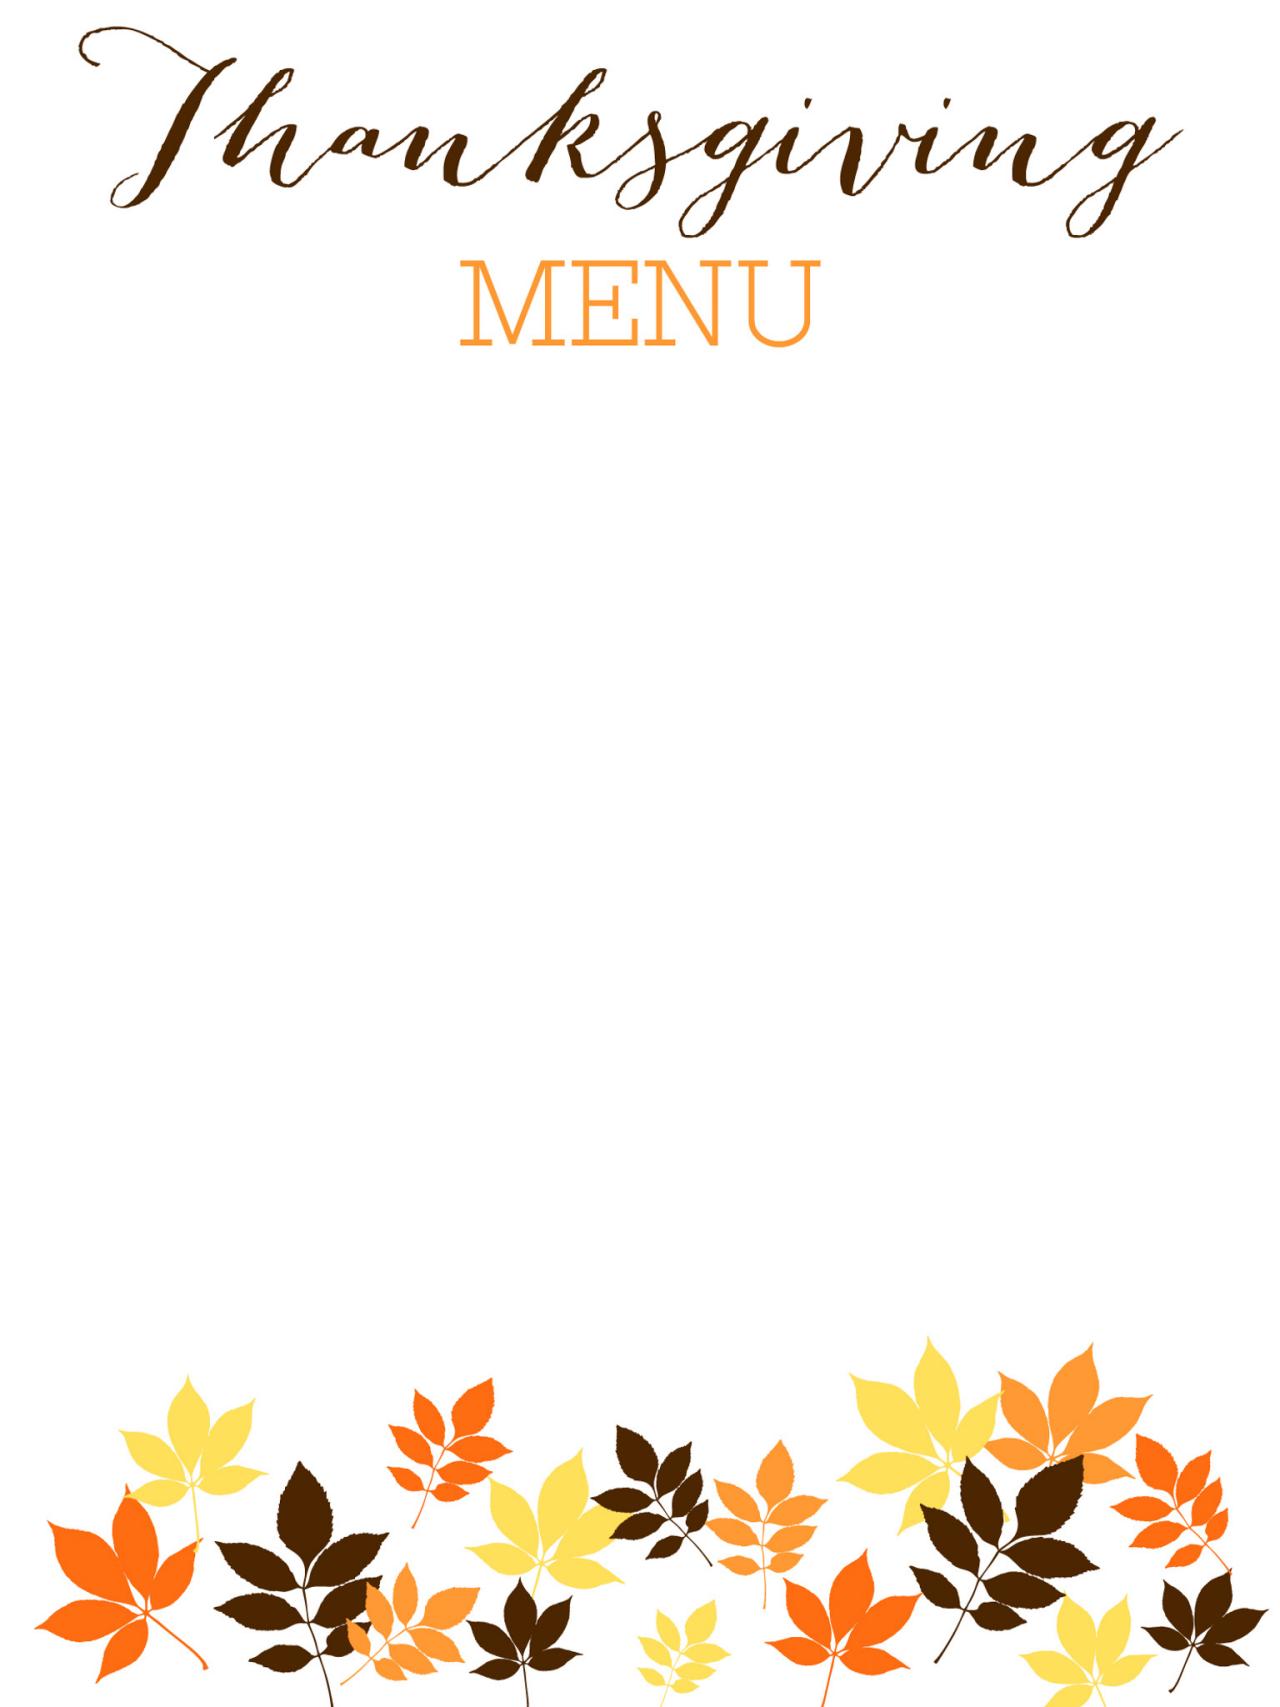 Free Thanksgiving Templates 31 Gift Tags, Cards, Crafts & More HGTV